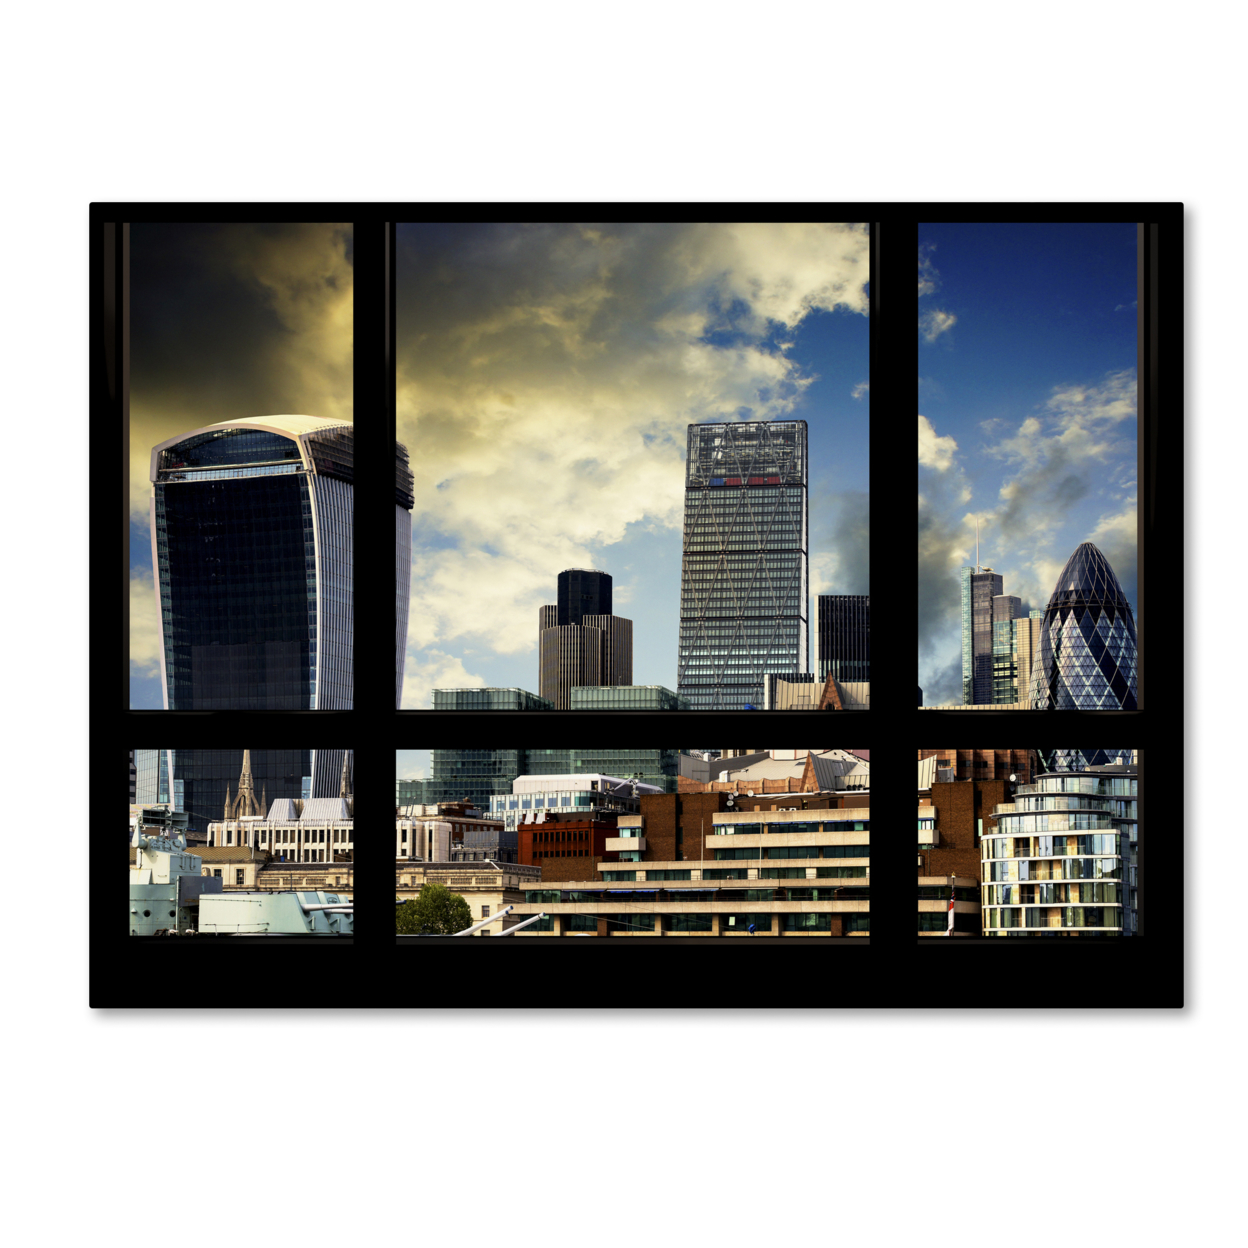 Philippe Hugonnard 'Window View UK Buildings 2' Canvas Wall Art 35 X 47 Inches